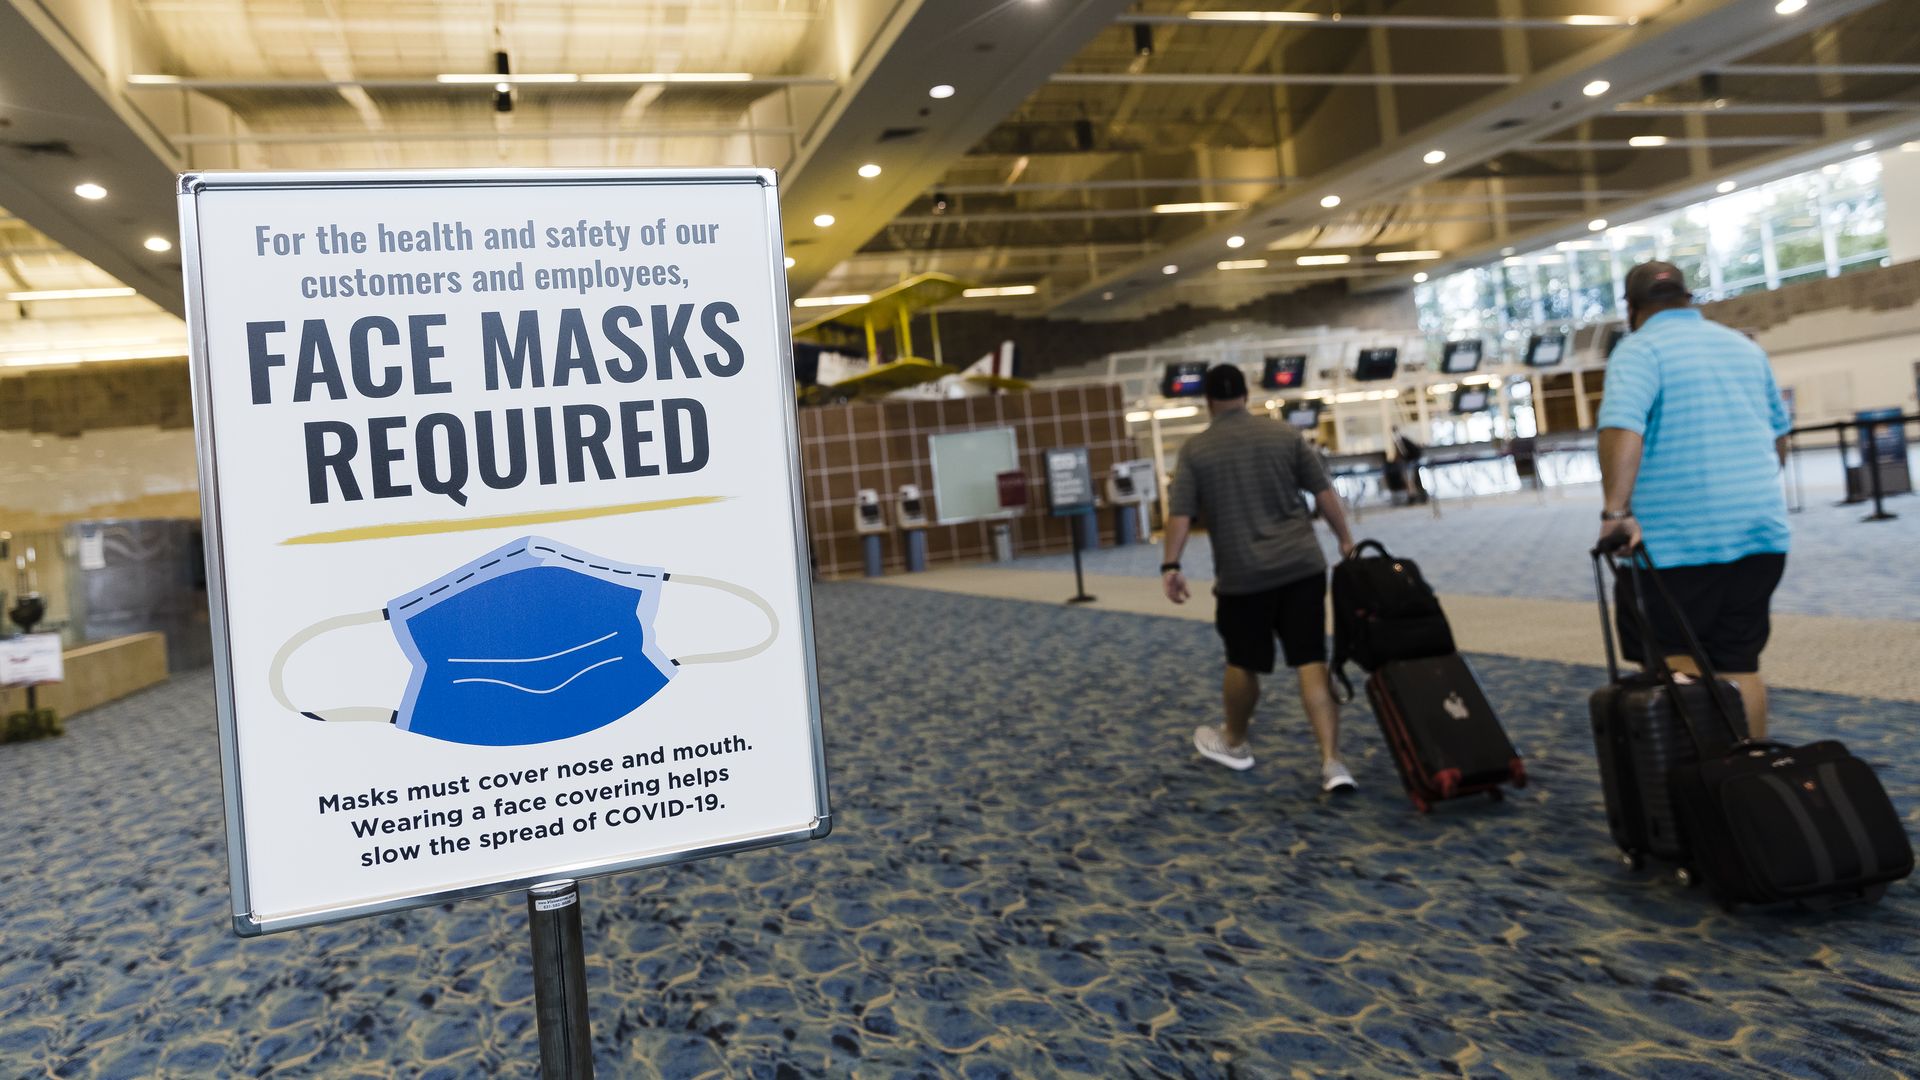 Photo of a sign that says "Face masks required" in an airport with two travelers on the right